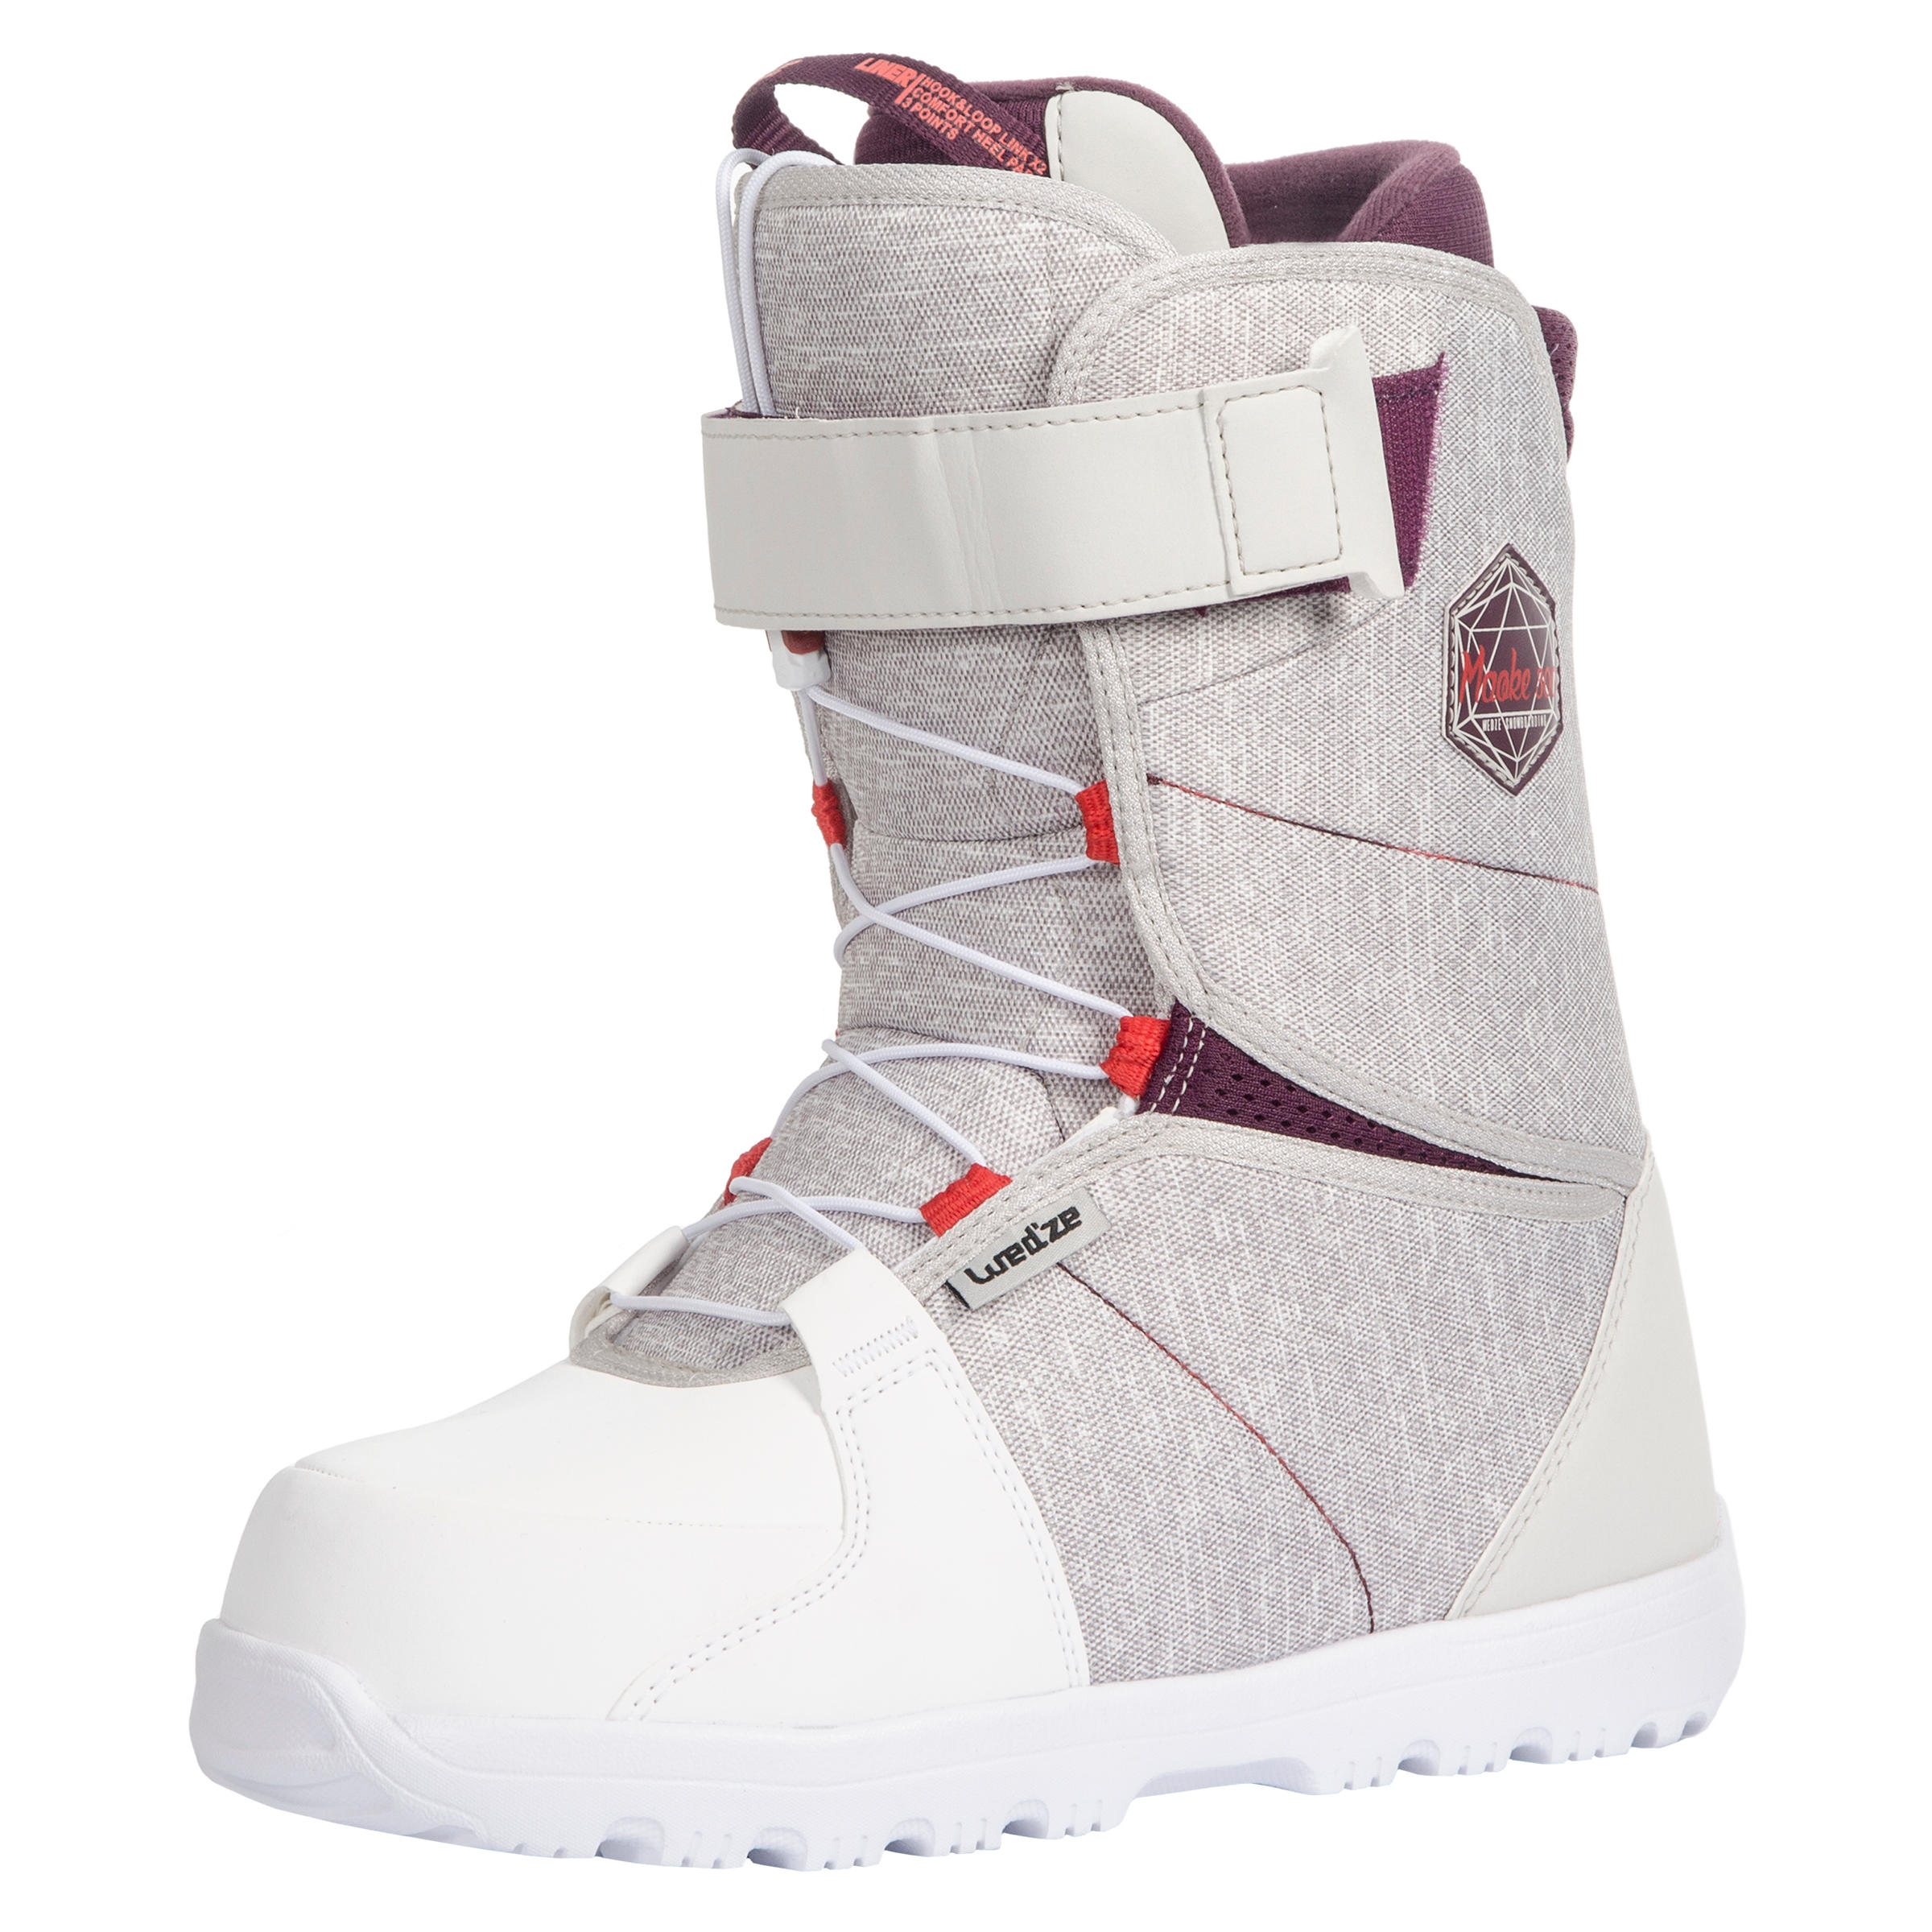 Snowboarding Boots | Winter Boots for 